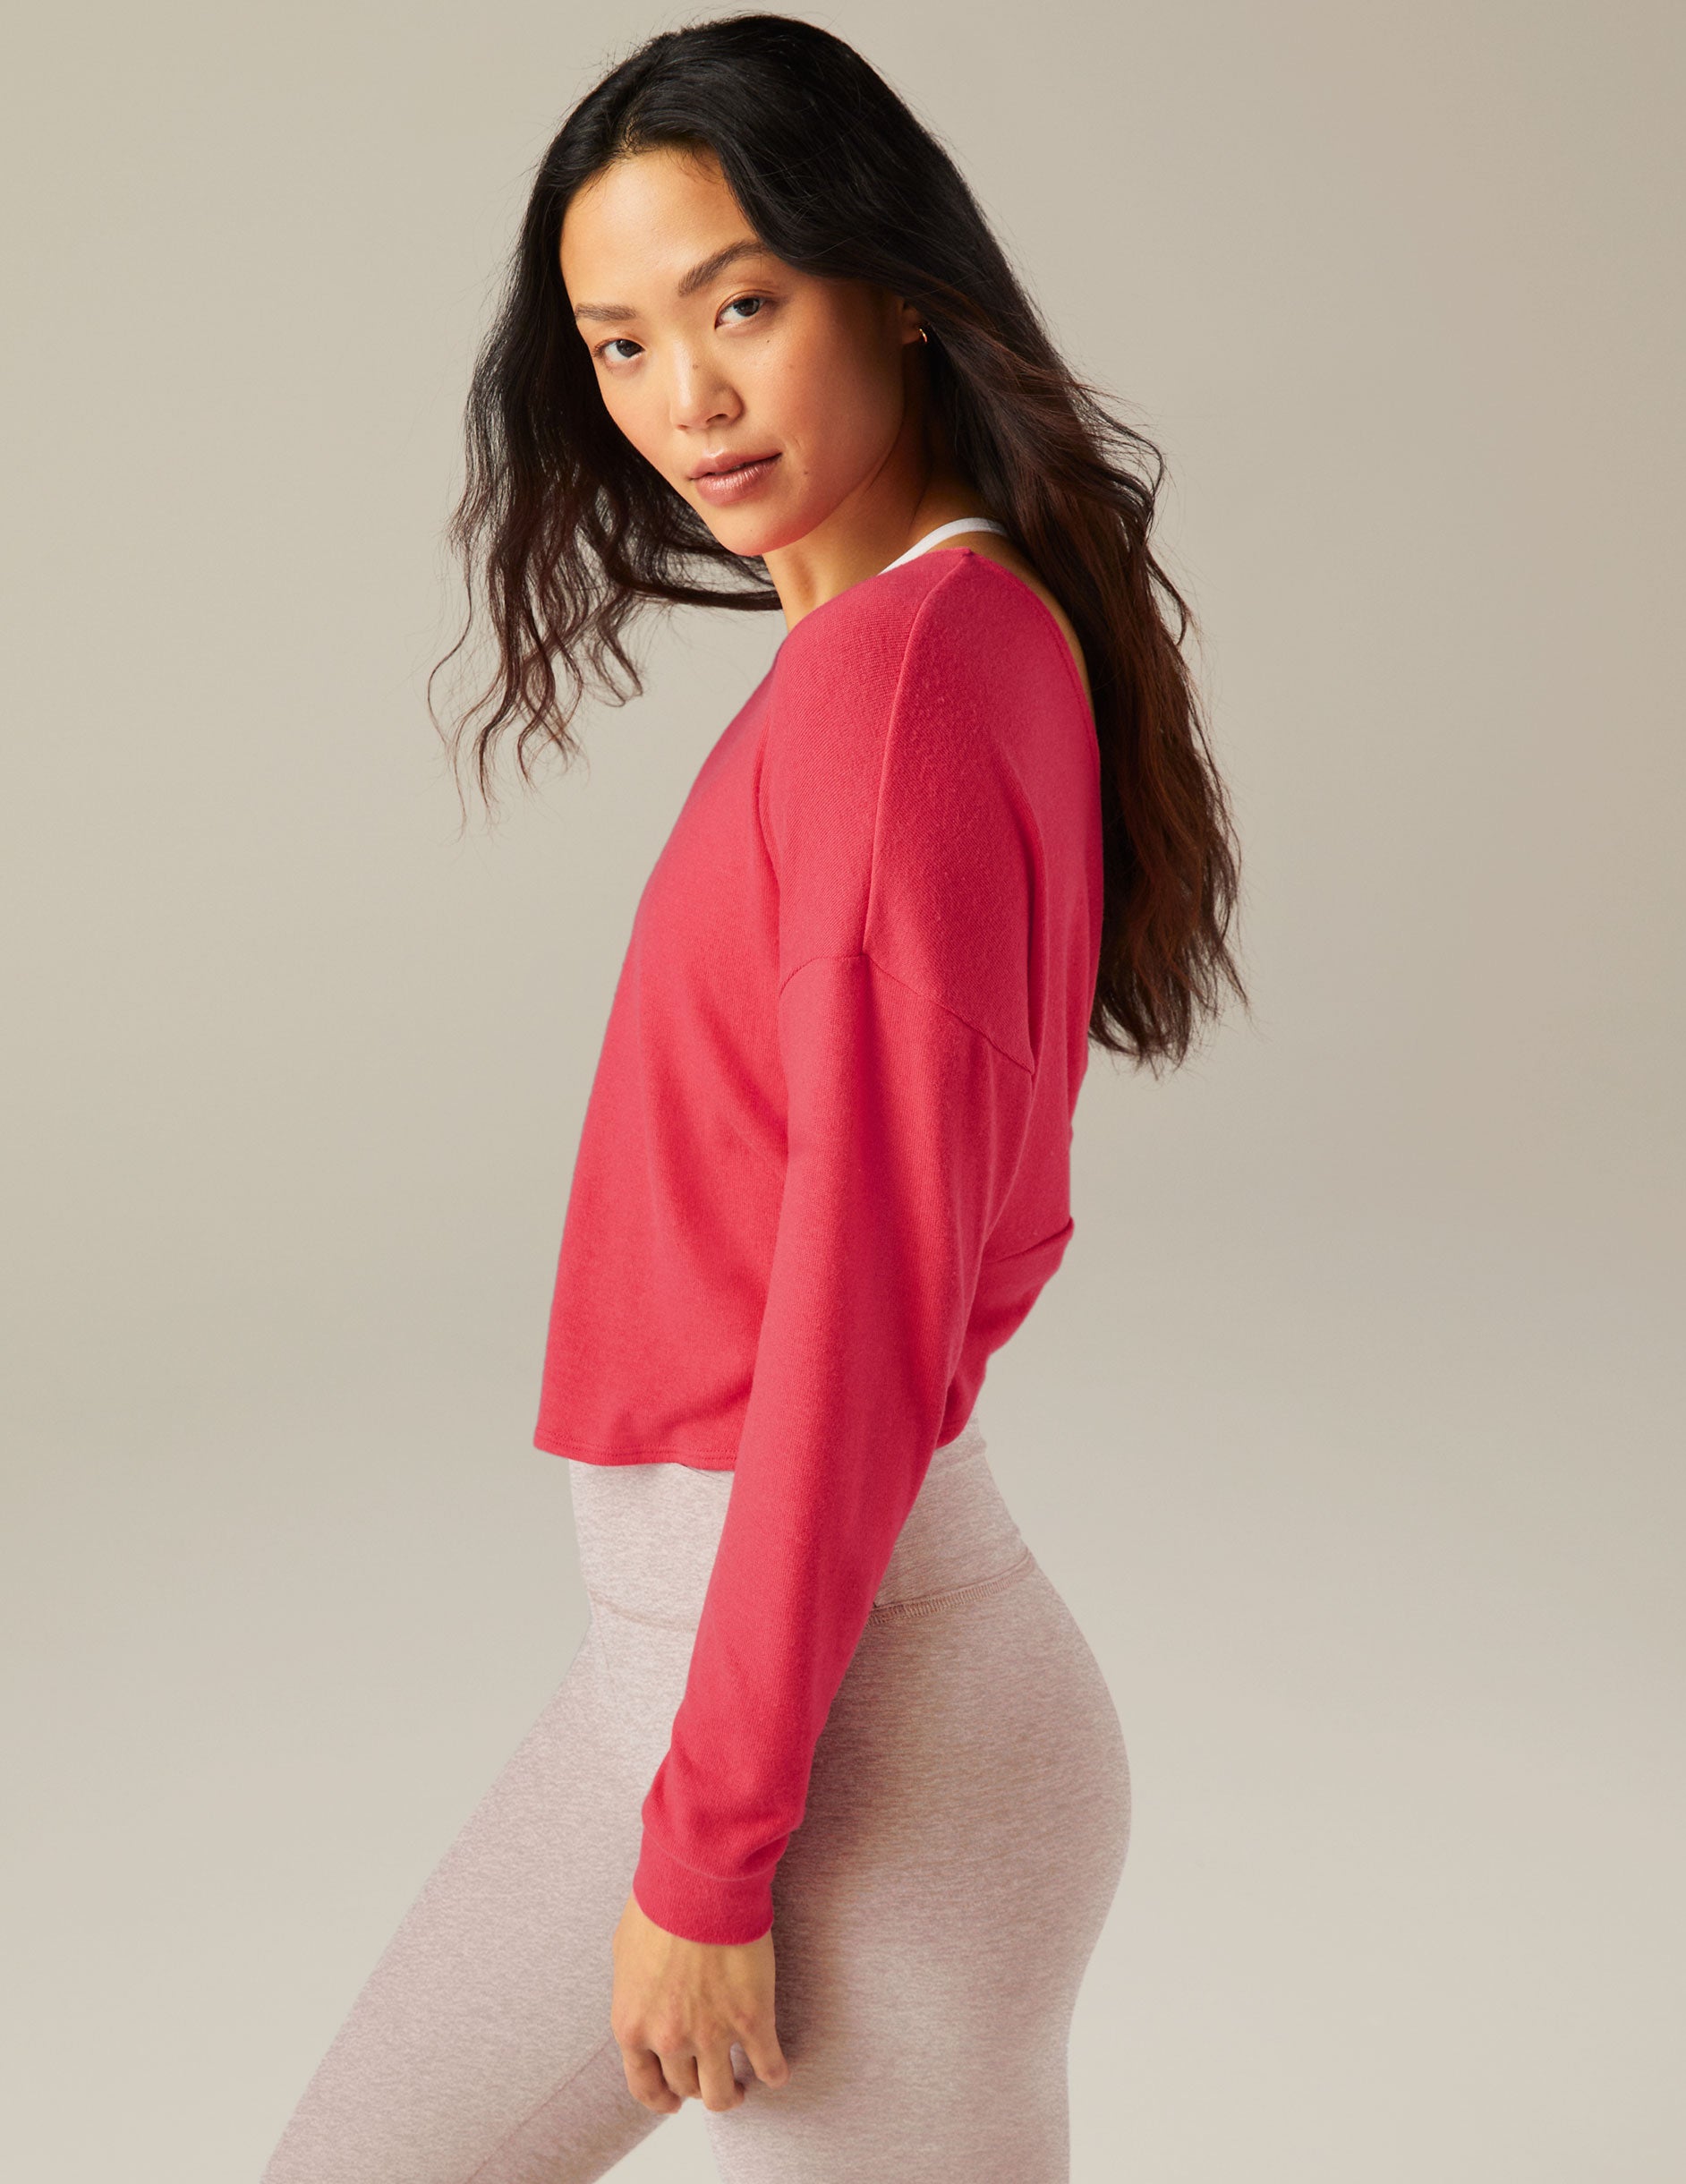 red long sleeve pullover with knot detail in back